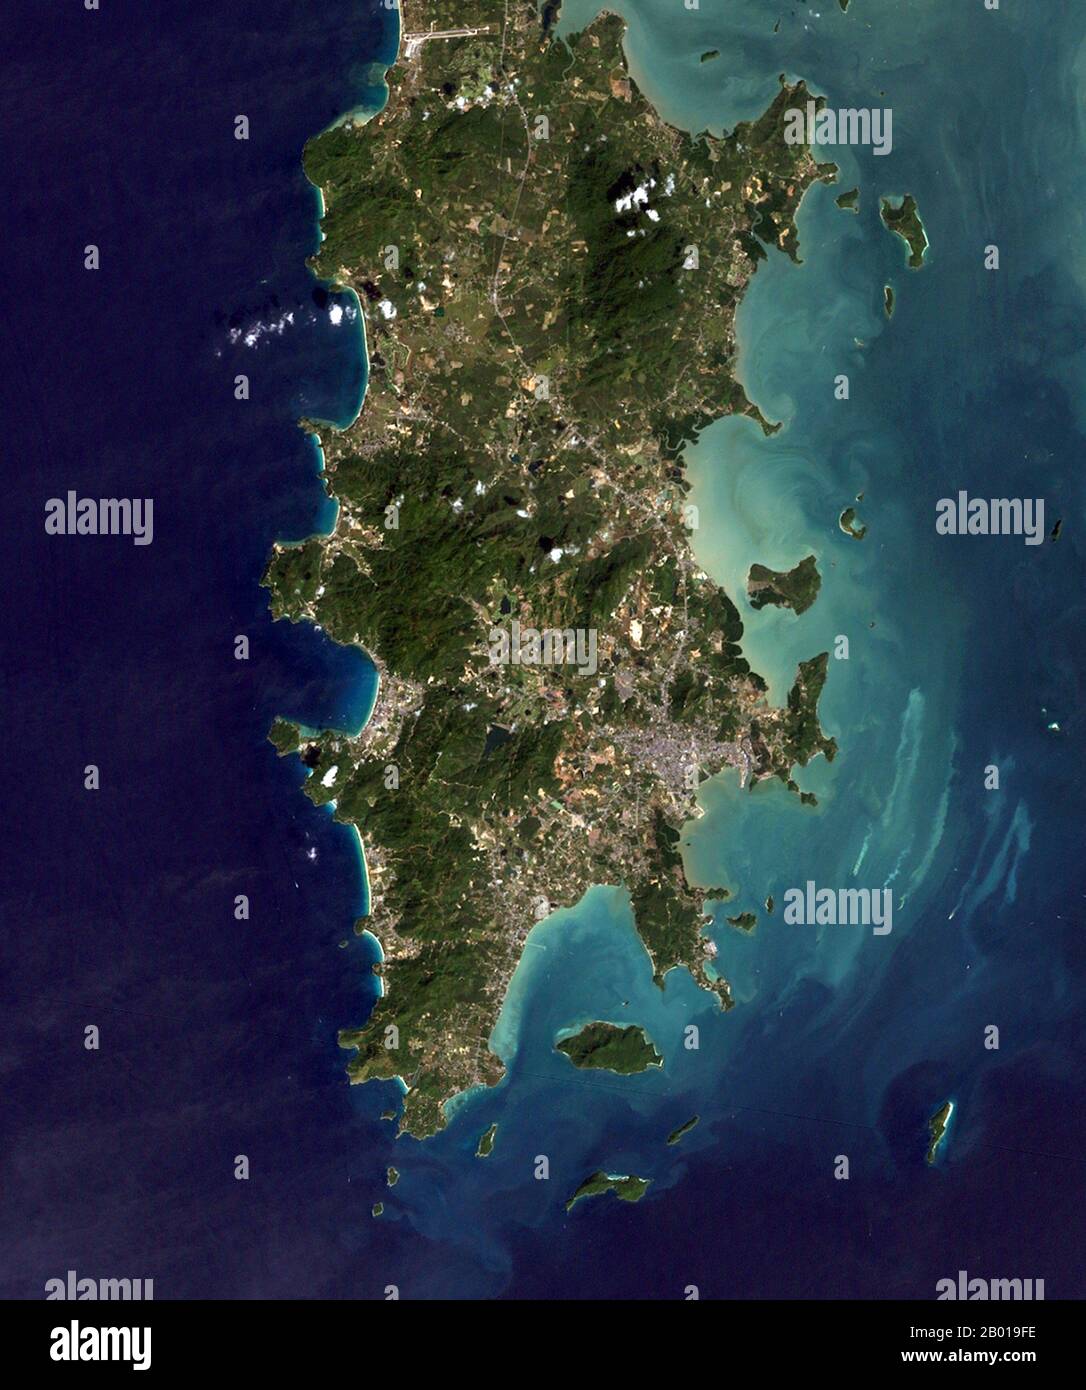 Thailand: Phuket Island and the surrounding Andaman Sea from space, 2004.  Phuket, formerly known as Talang and, in Western sources, Junk Ceylon (a corruption of the Malay Tanjung Salang, i.e. 'Cape Salang'), is one of the southern provinces (changwat) of Thailand. Neighbouring provinces are (from north clockwise) Phang Nga and Krabi, but as Phuket is an island there are no land boundaries.  Phuket, which is approximately the size of Singapore, is Thailand’s largest island. Connected to mainland Thailand by two bridges, it is situated off the west coast of Thailand in the Andaman Sea. Stock Photo